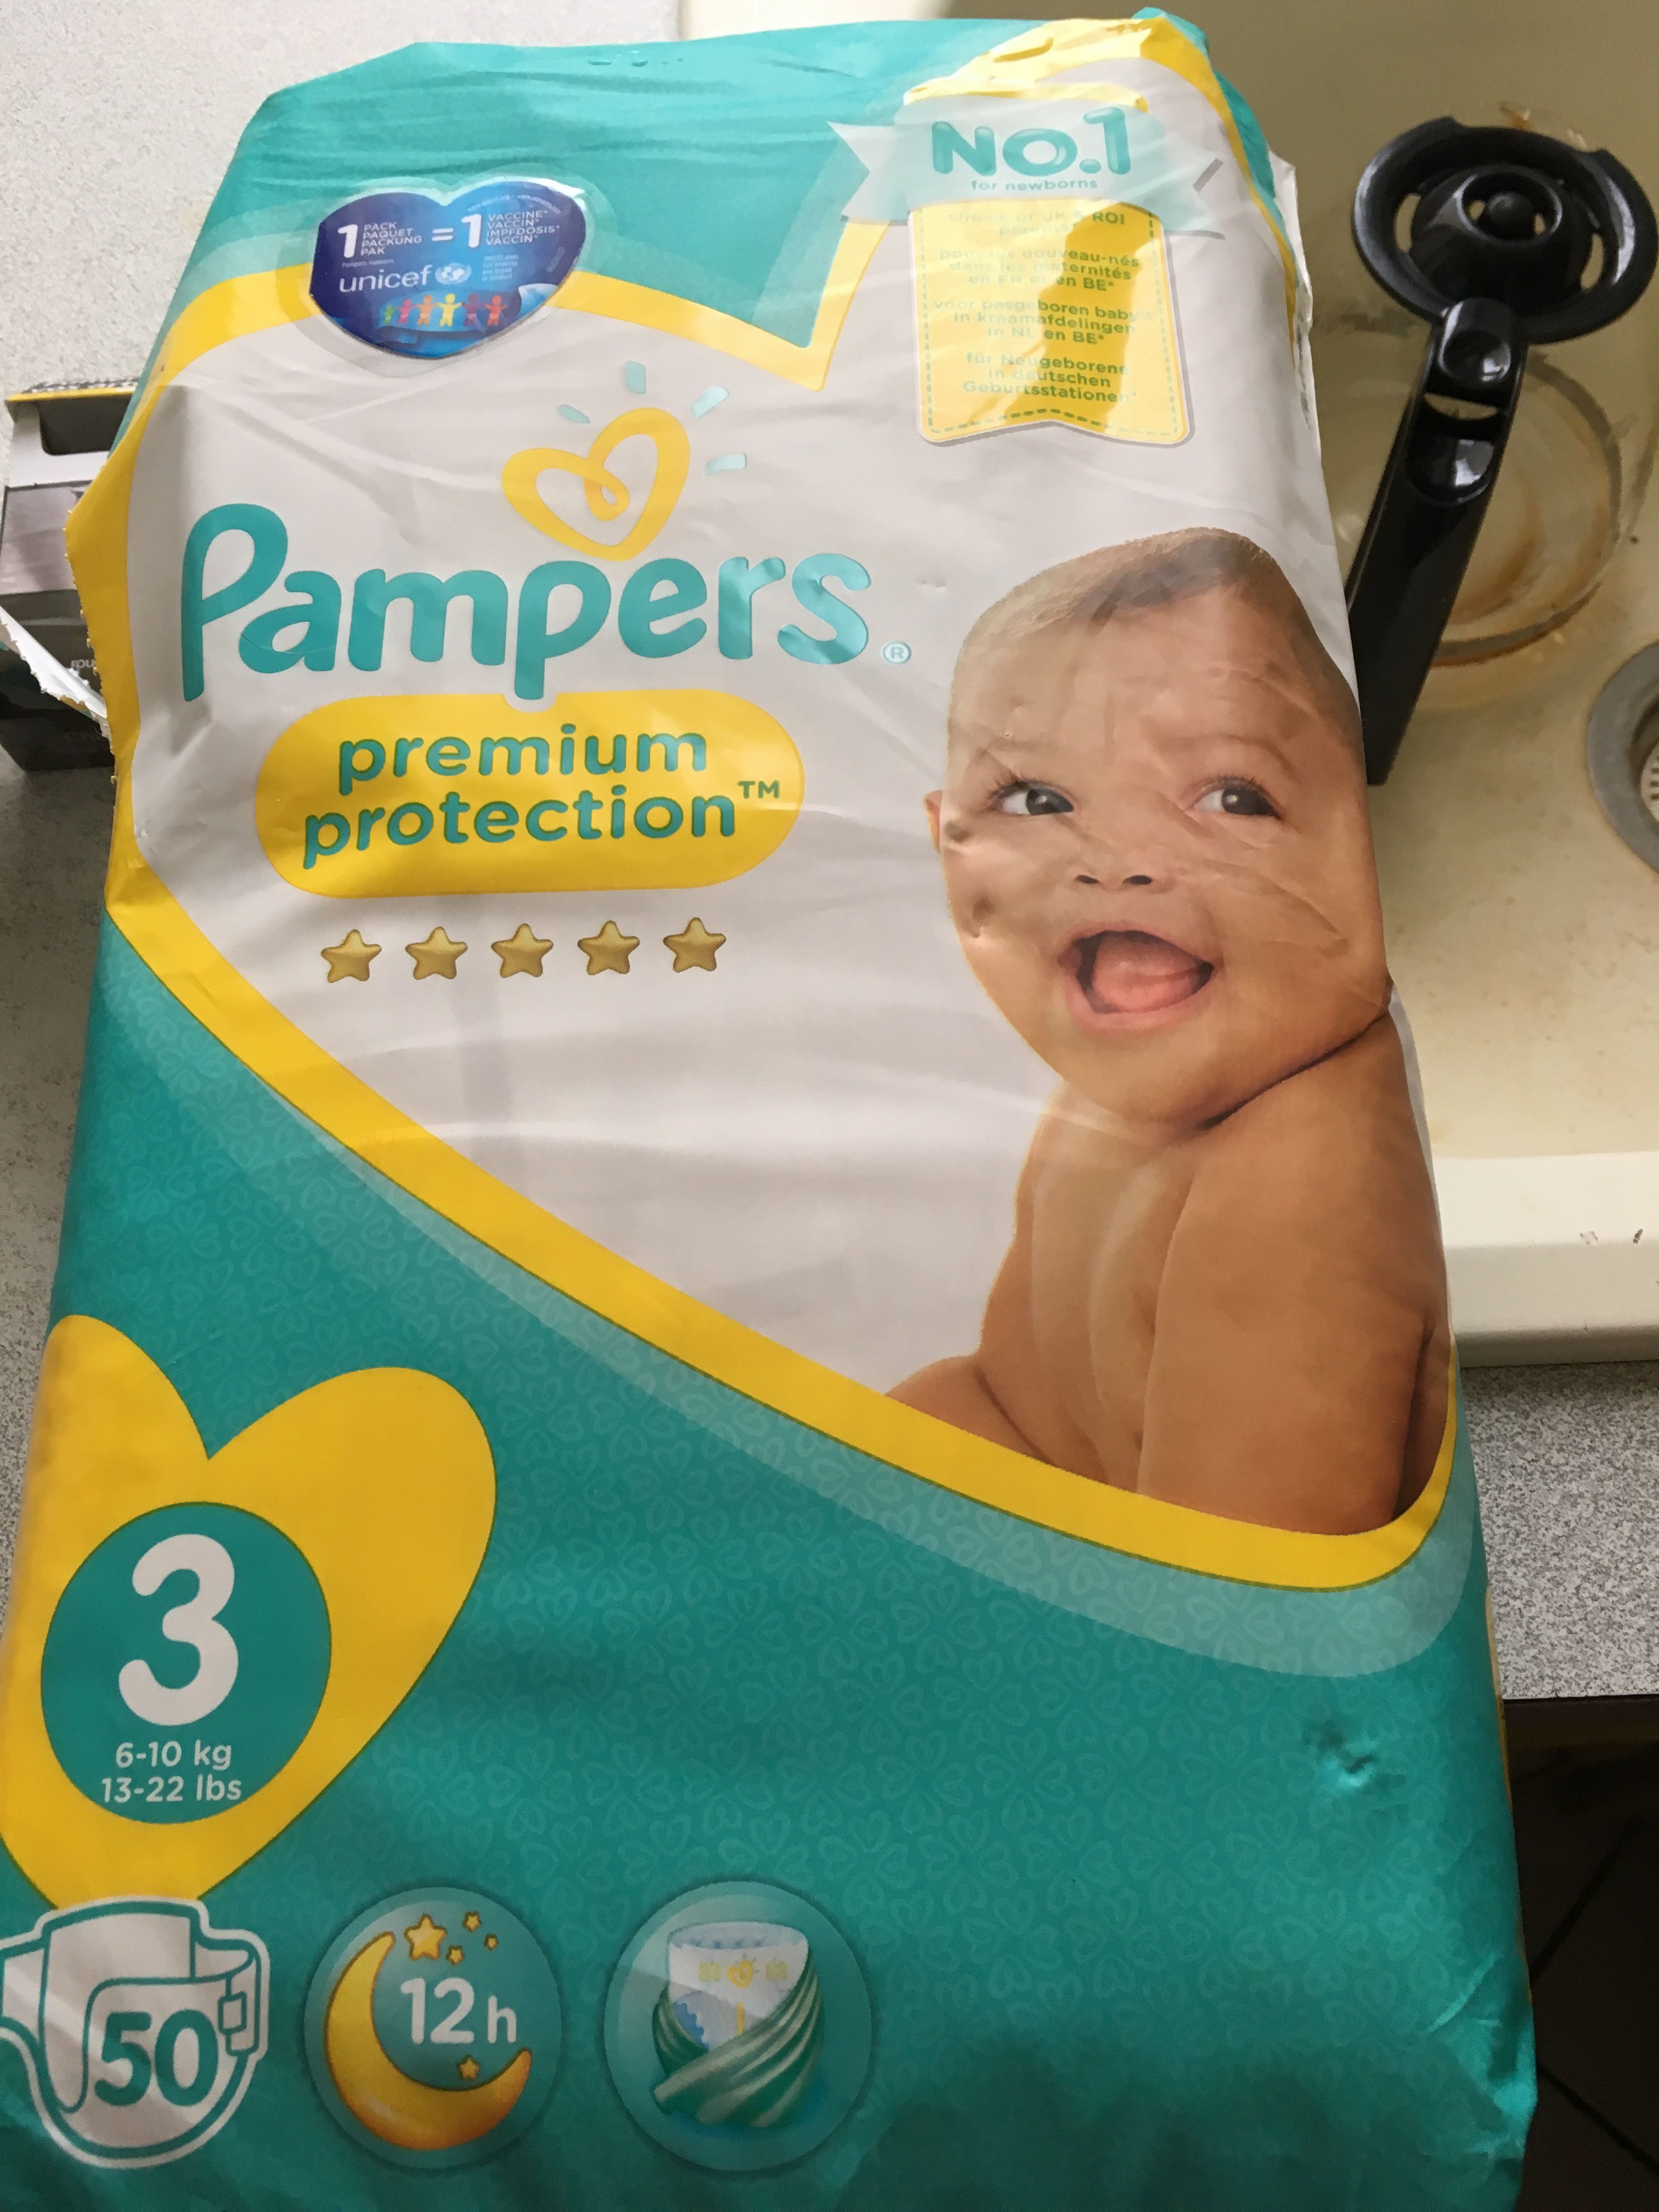 Pack duo de couches Pampers Premium protection - 406 couches